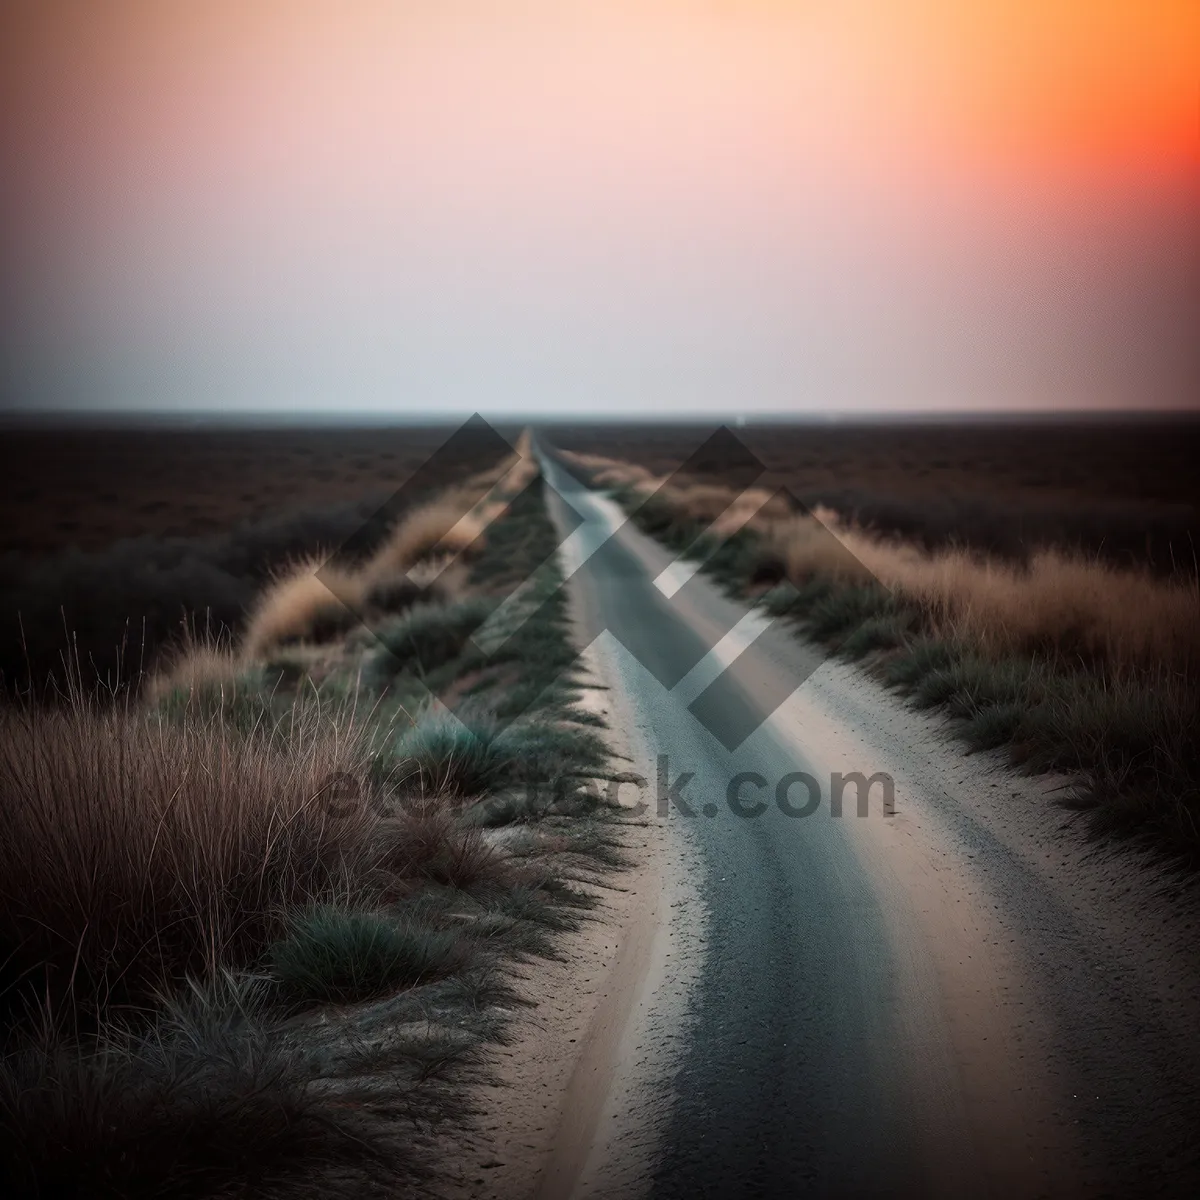 Picture of Sunset Road: Tranquil Rural Landscape with Asphalt Highway and Dreamy Sky